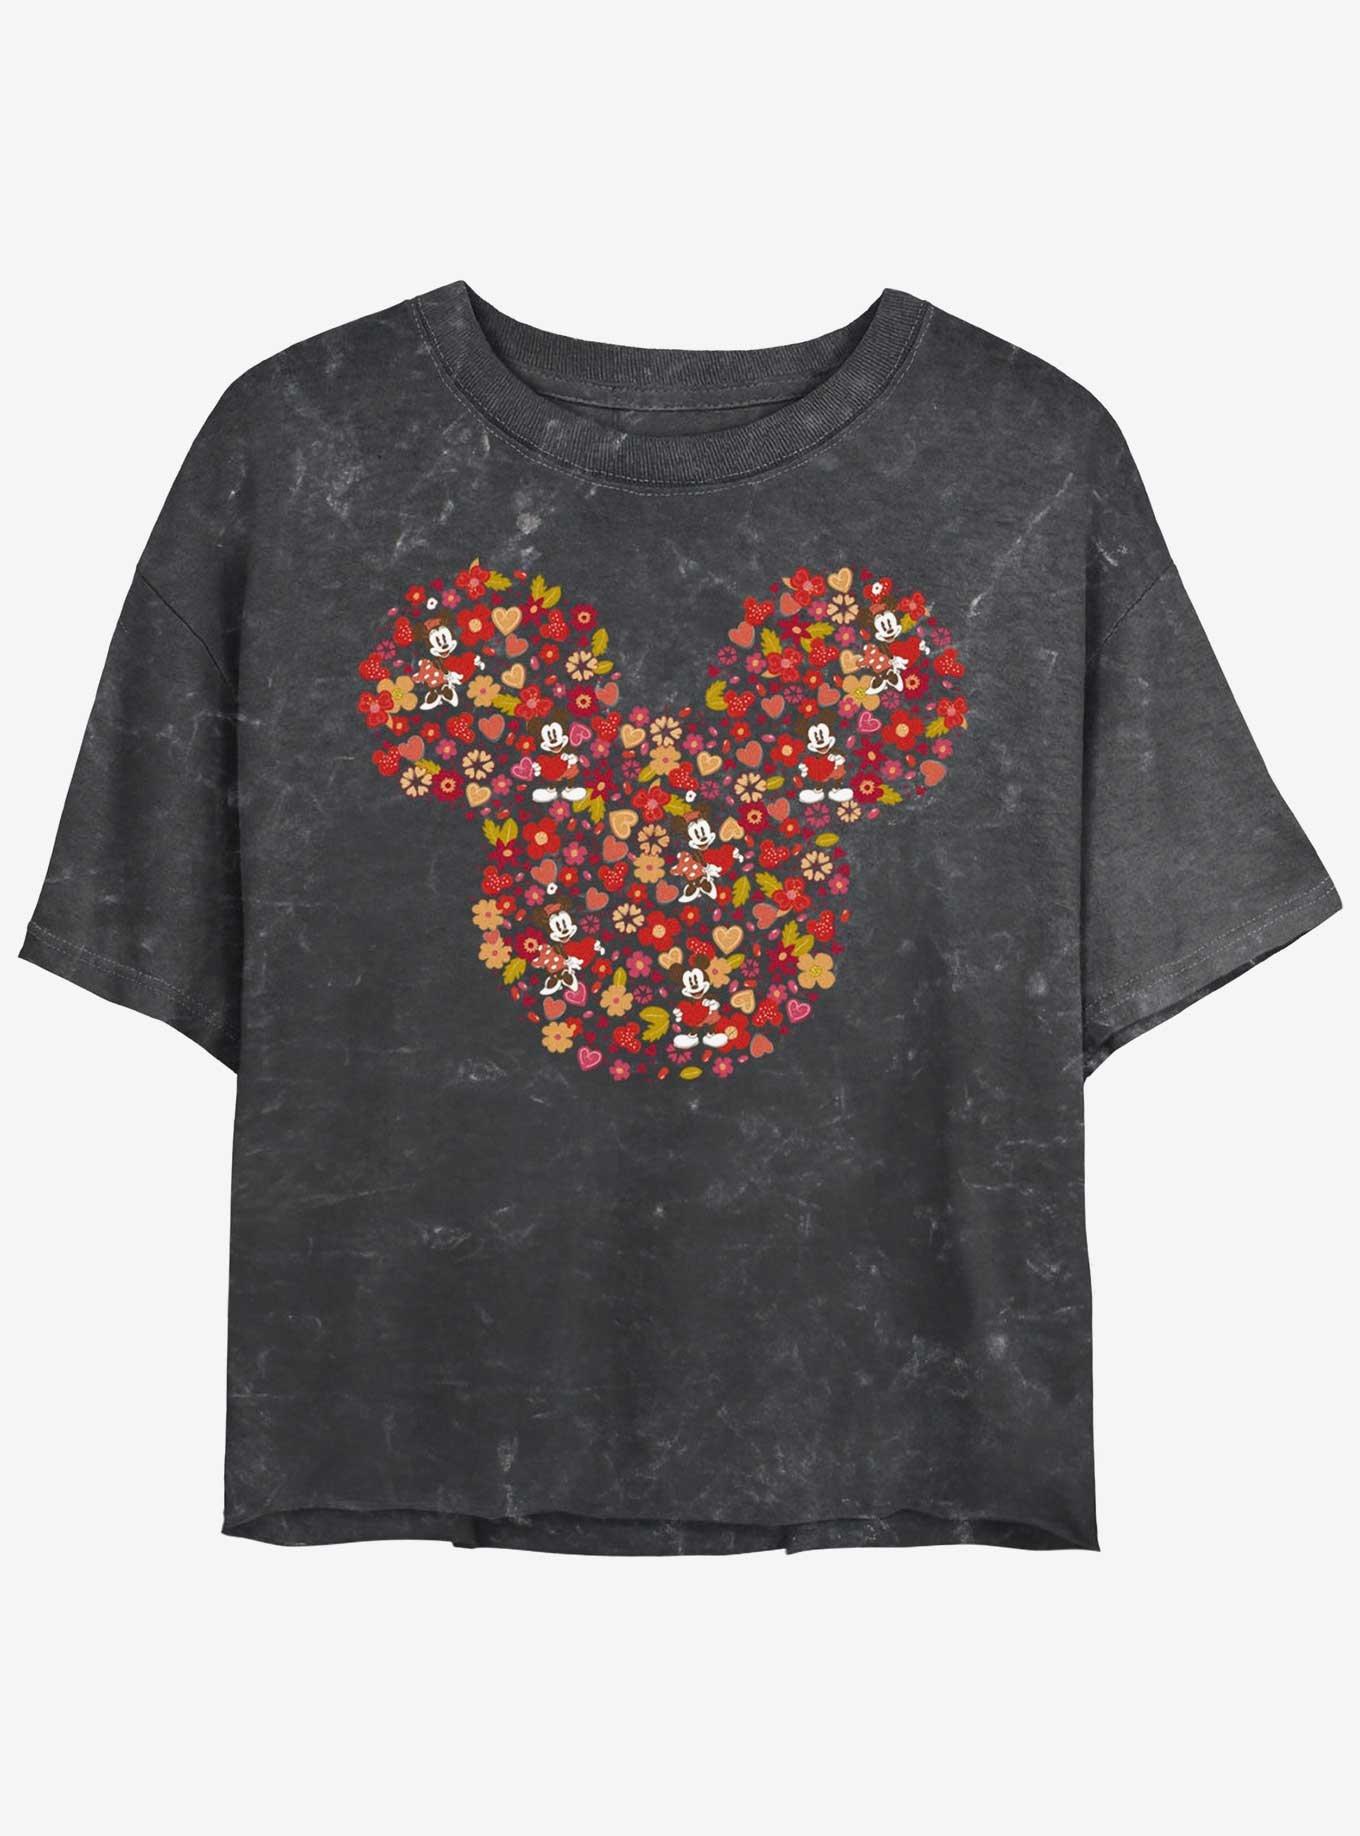 Disney Mickey Mouse Mickey Flowers Mineral Wash Girls Crop T-Shirt, BLACK, hi-res